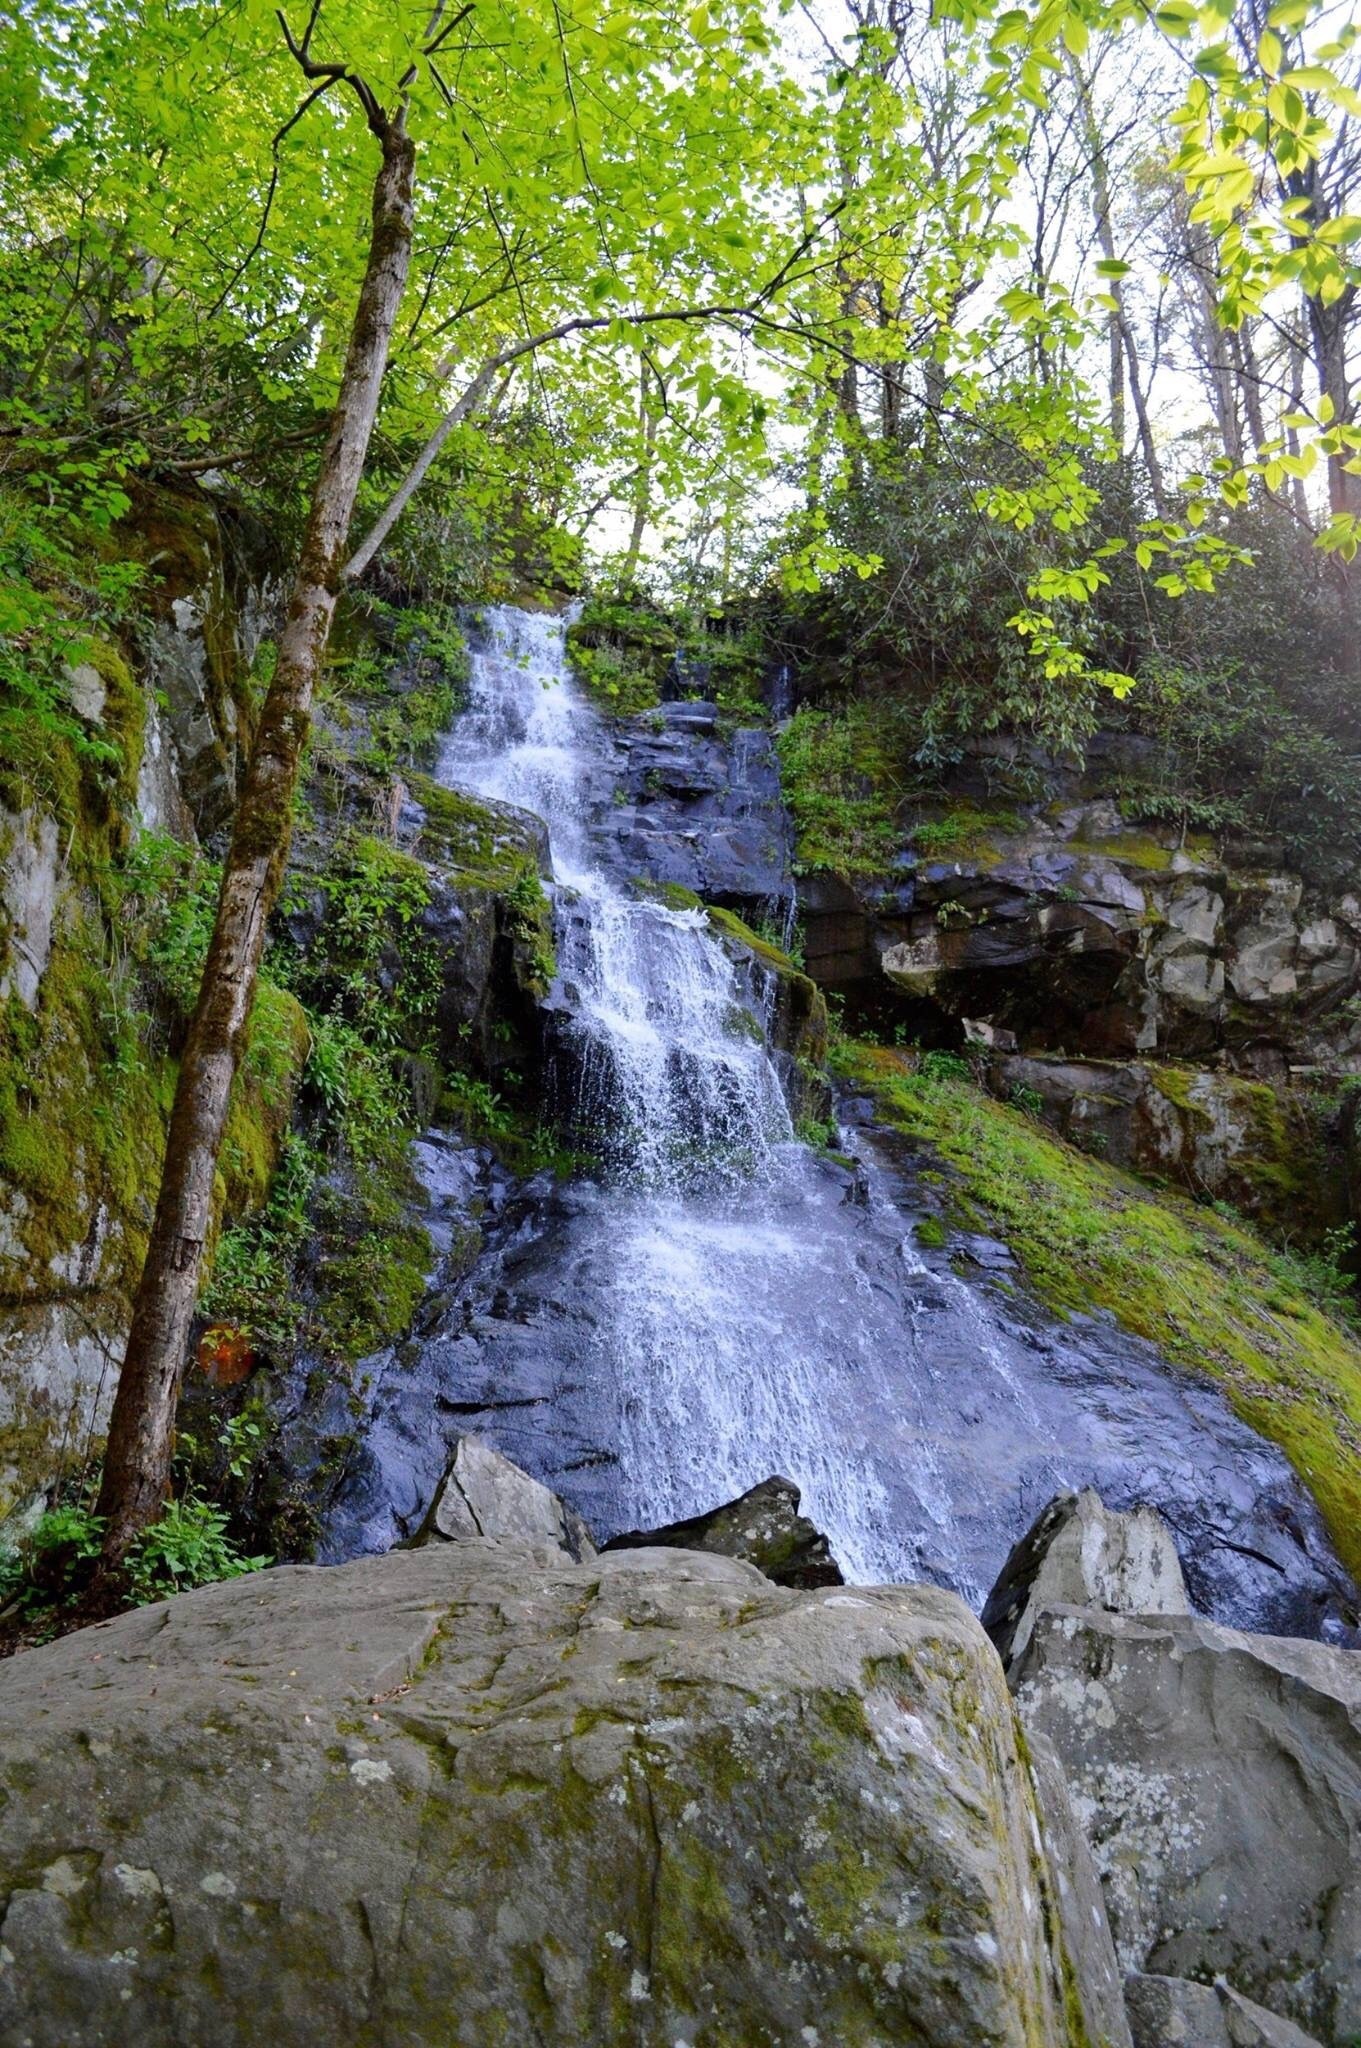 Gorgeous 90 feet waterfall on my backpacking/ hiking/ camping trip to the Great Smoky Mountains National Park. #waterfall #springhiking #nationalparks #outdoor 